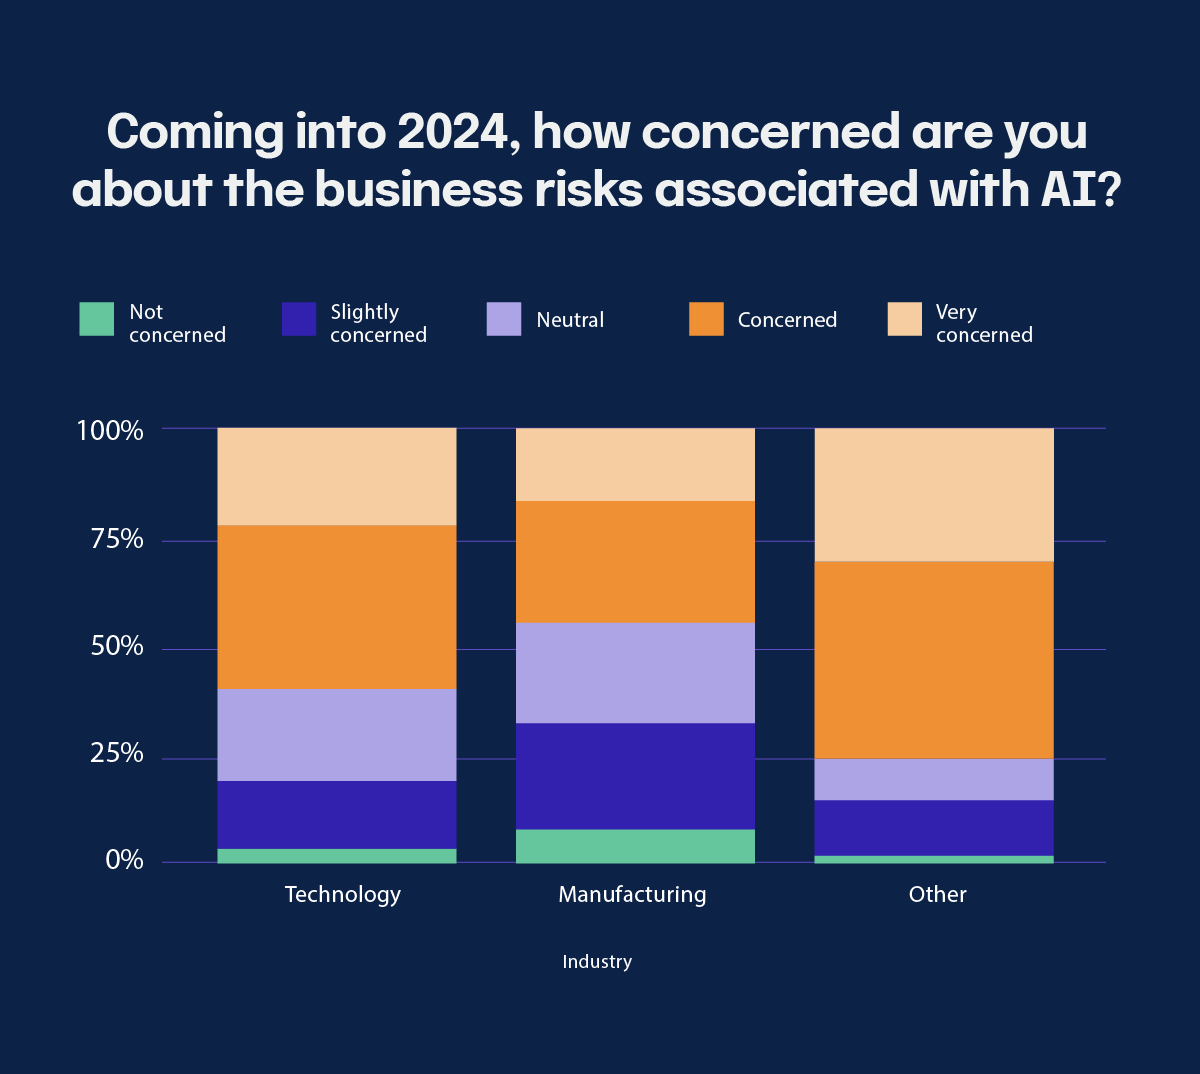 How much businesses are concerned with AI risk in 2024